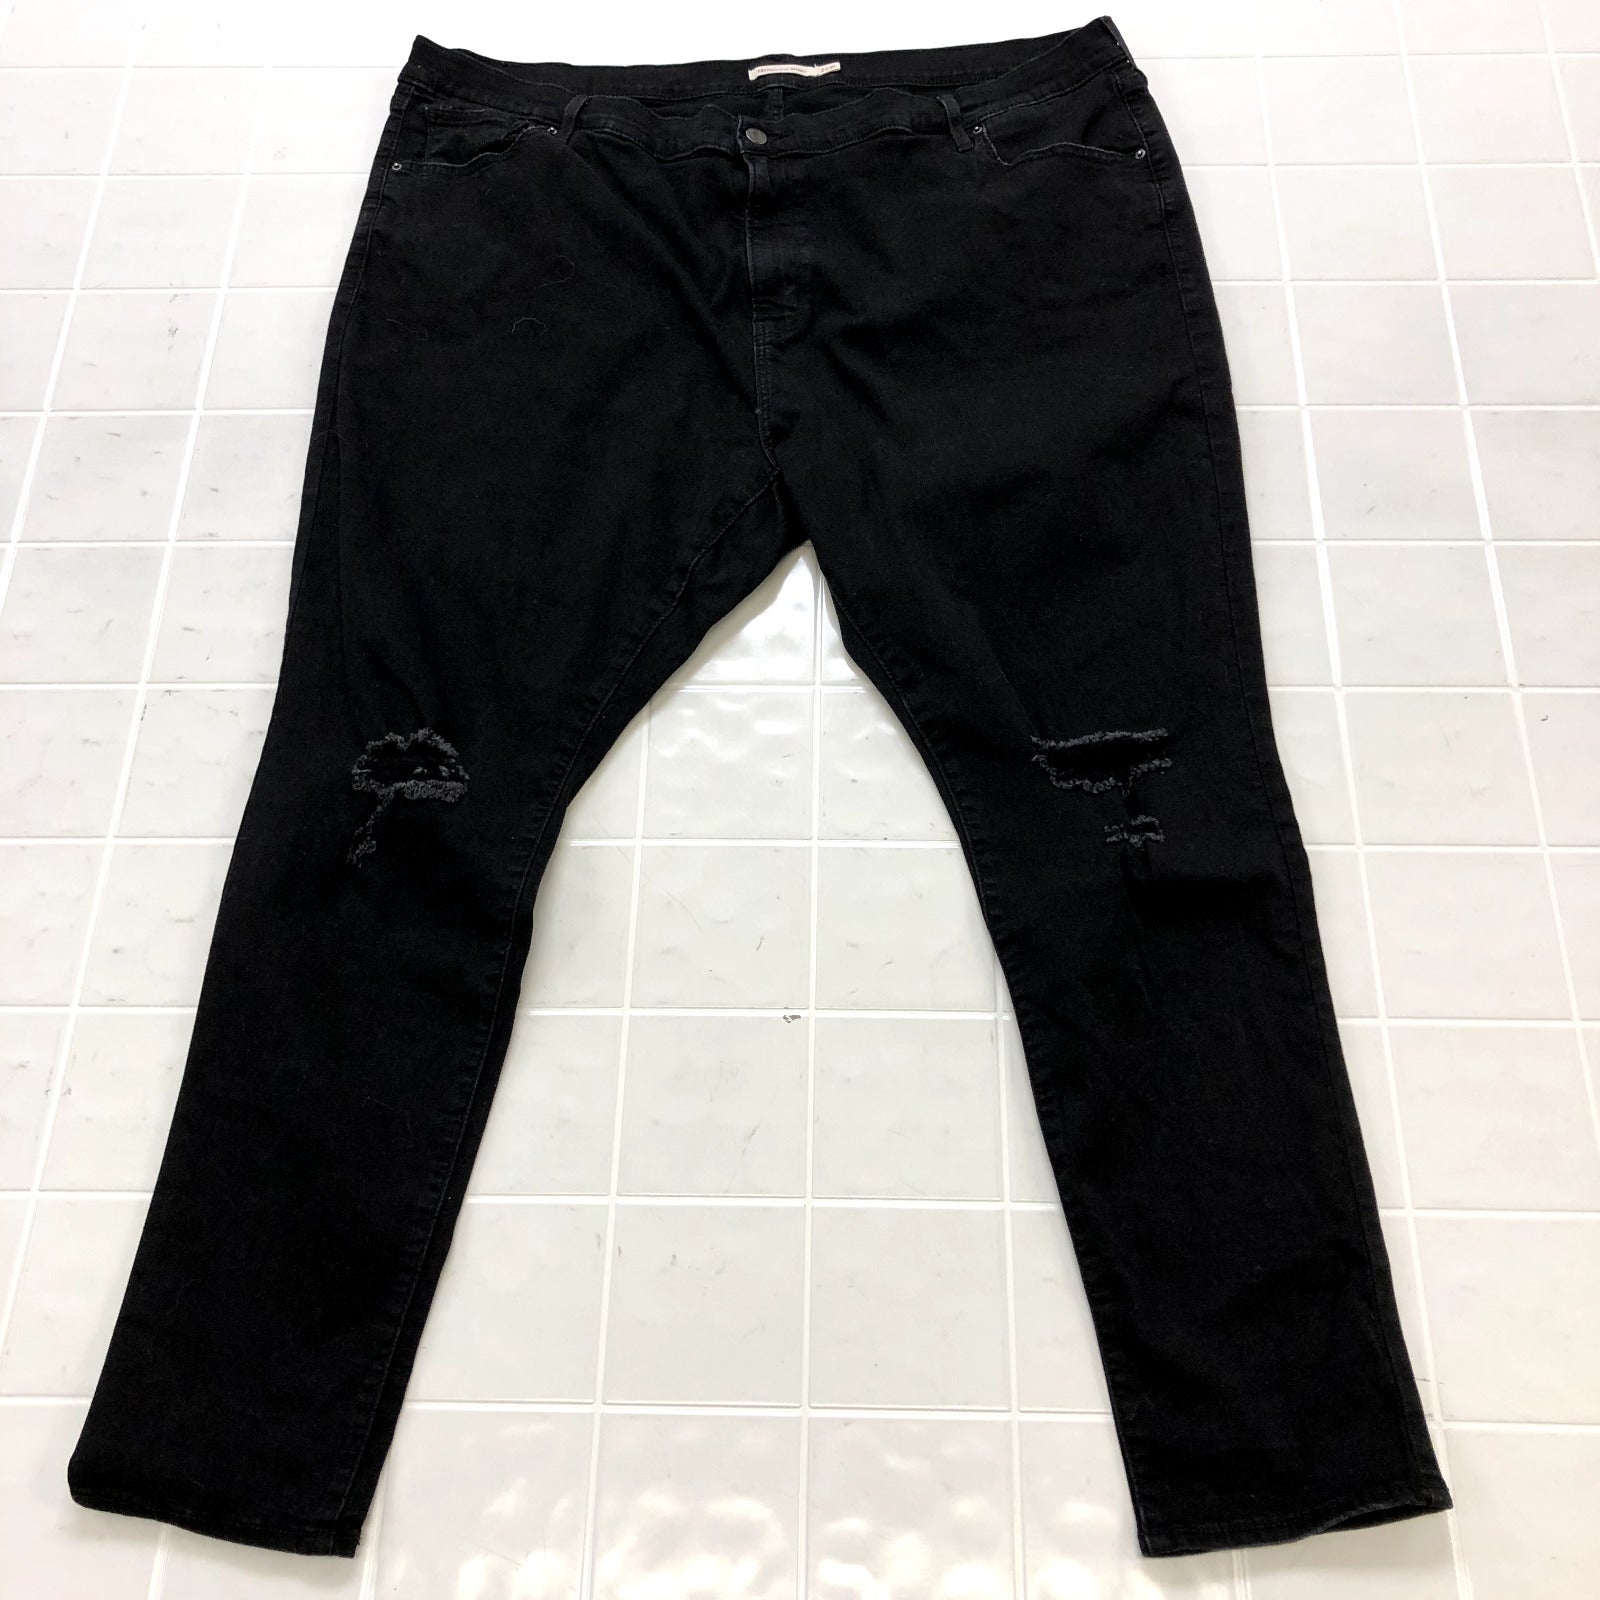 Levi's 721 Black Denim Flat Front Chino Tapered Skinny Jeans Women's Size 26W